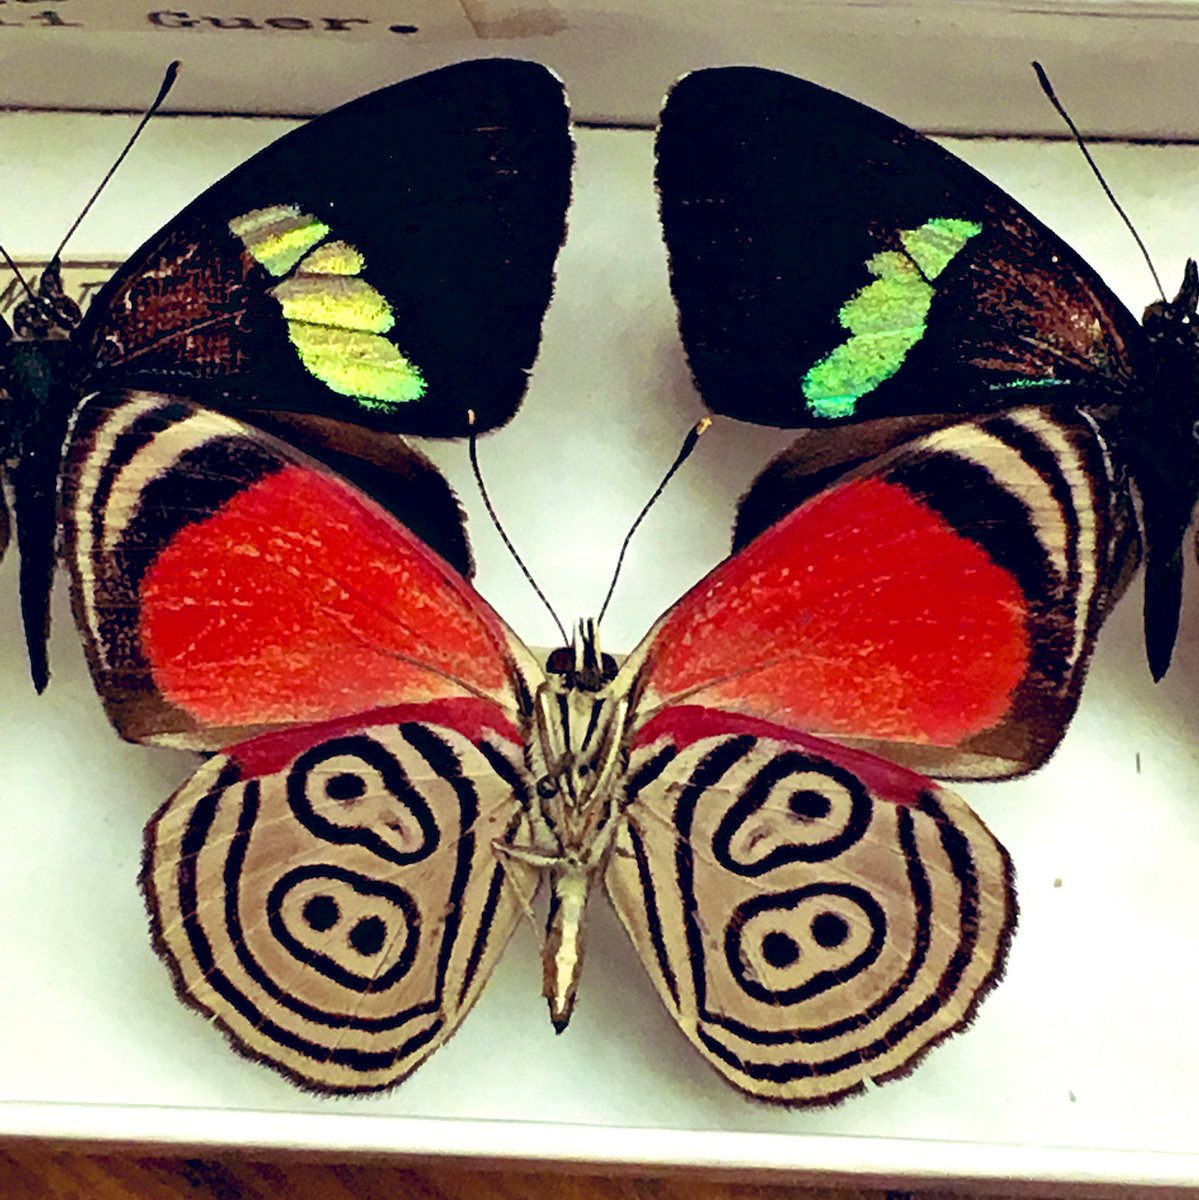 Some very old Anna’s 88 butterflies in the holdings of the Triplehorn Insect Collection  @OSUCatOSU en.wikipedia.org/wiki/Diaethria… #StayAtHome #LearnAtHome @ASCatOSU @ASC_Tech @drpyralid